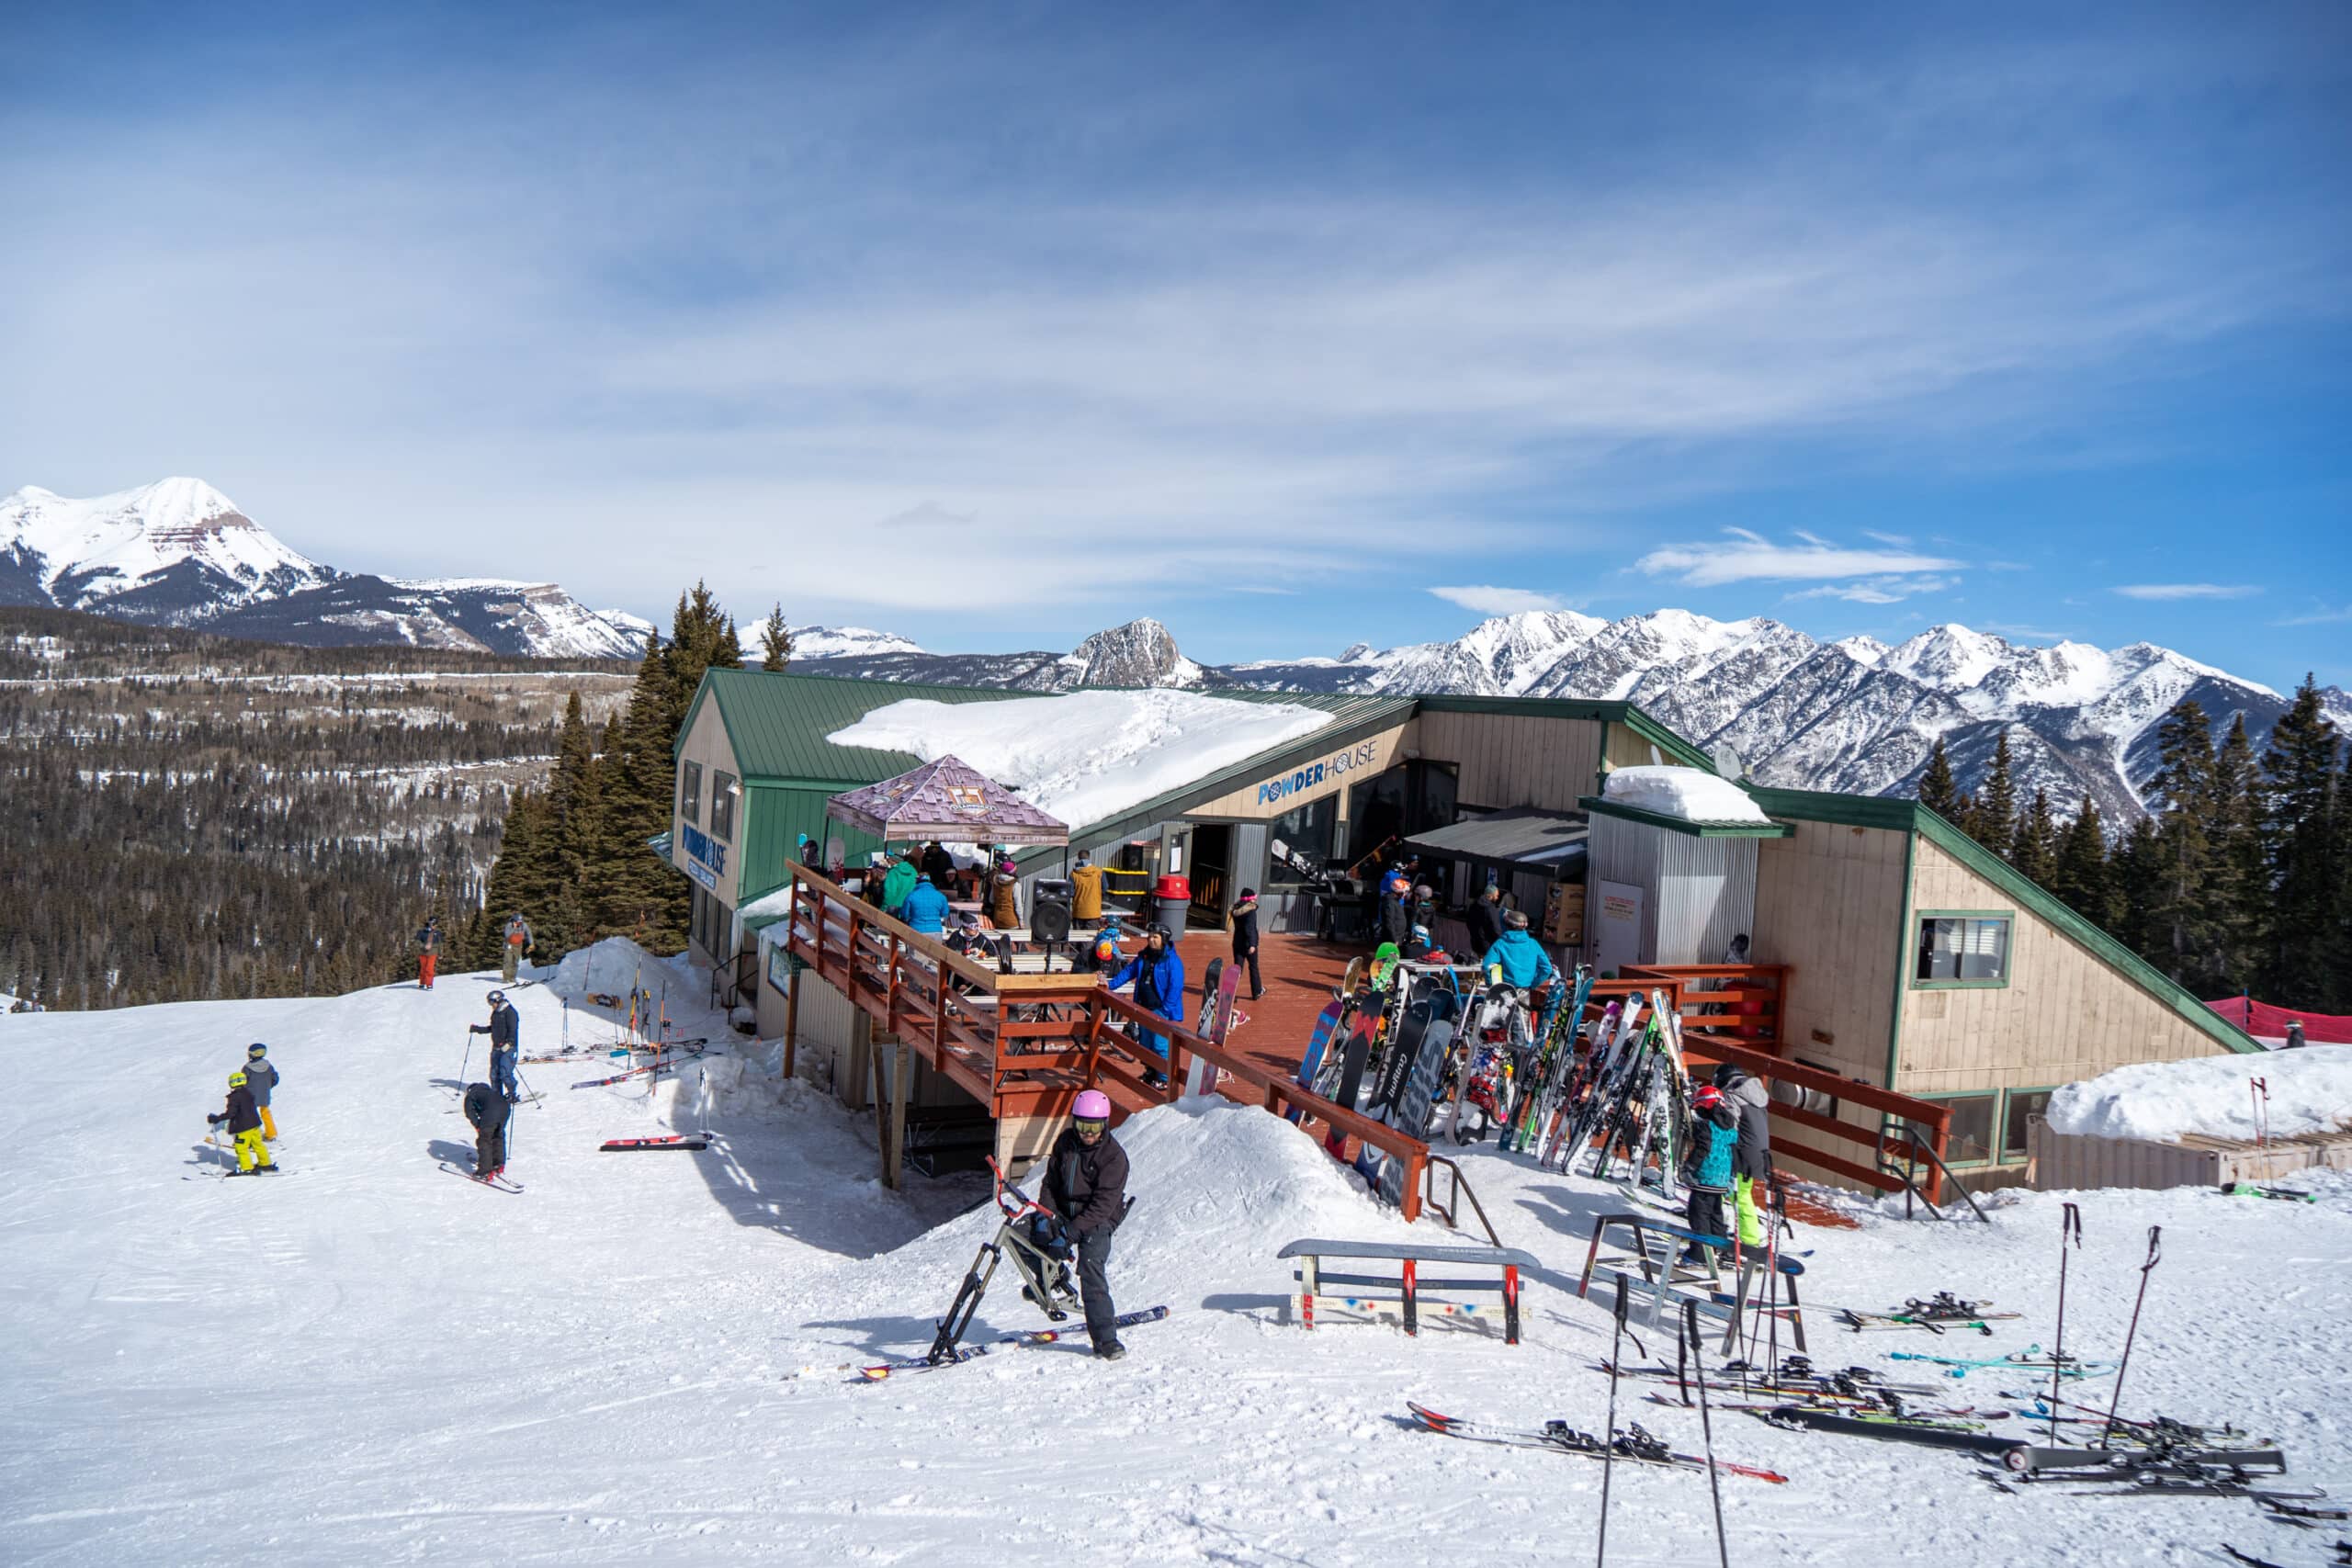 View of a restaurant, at a ski resort